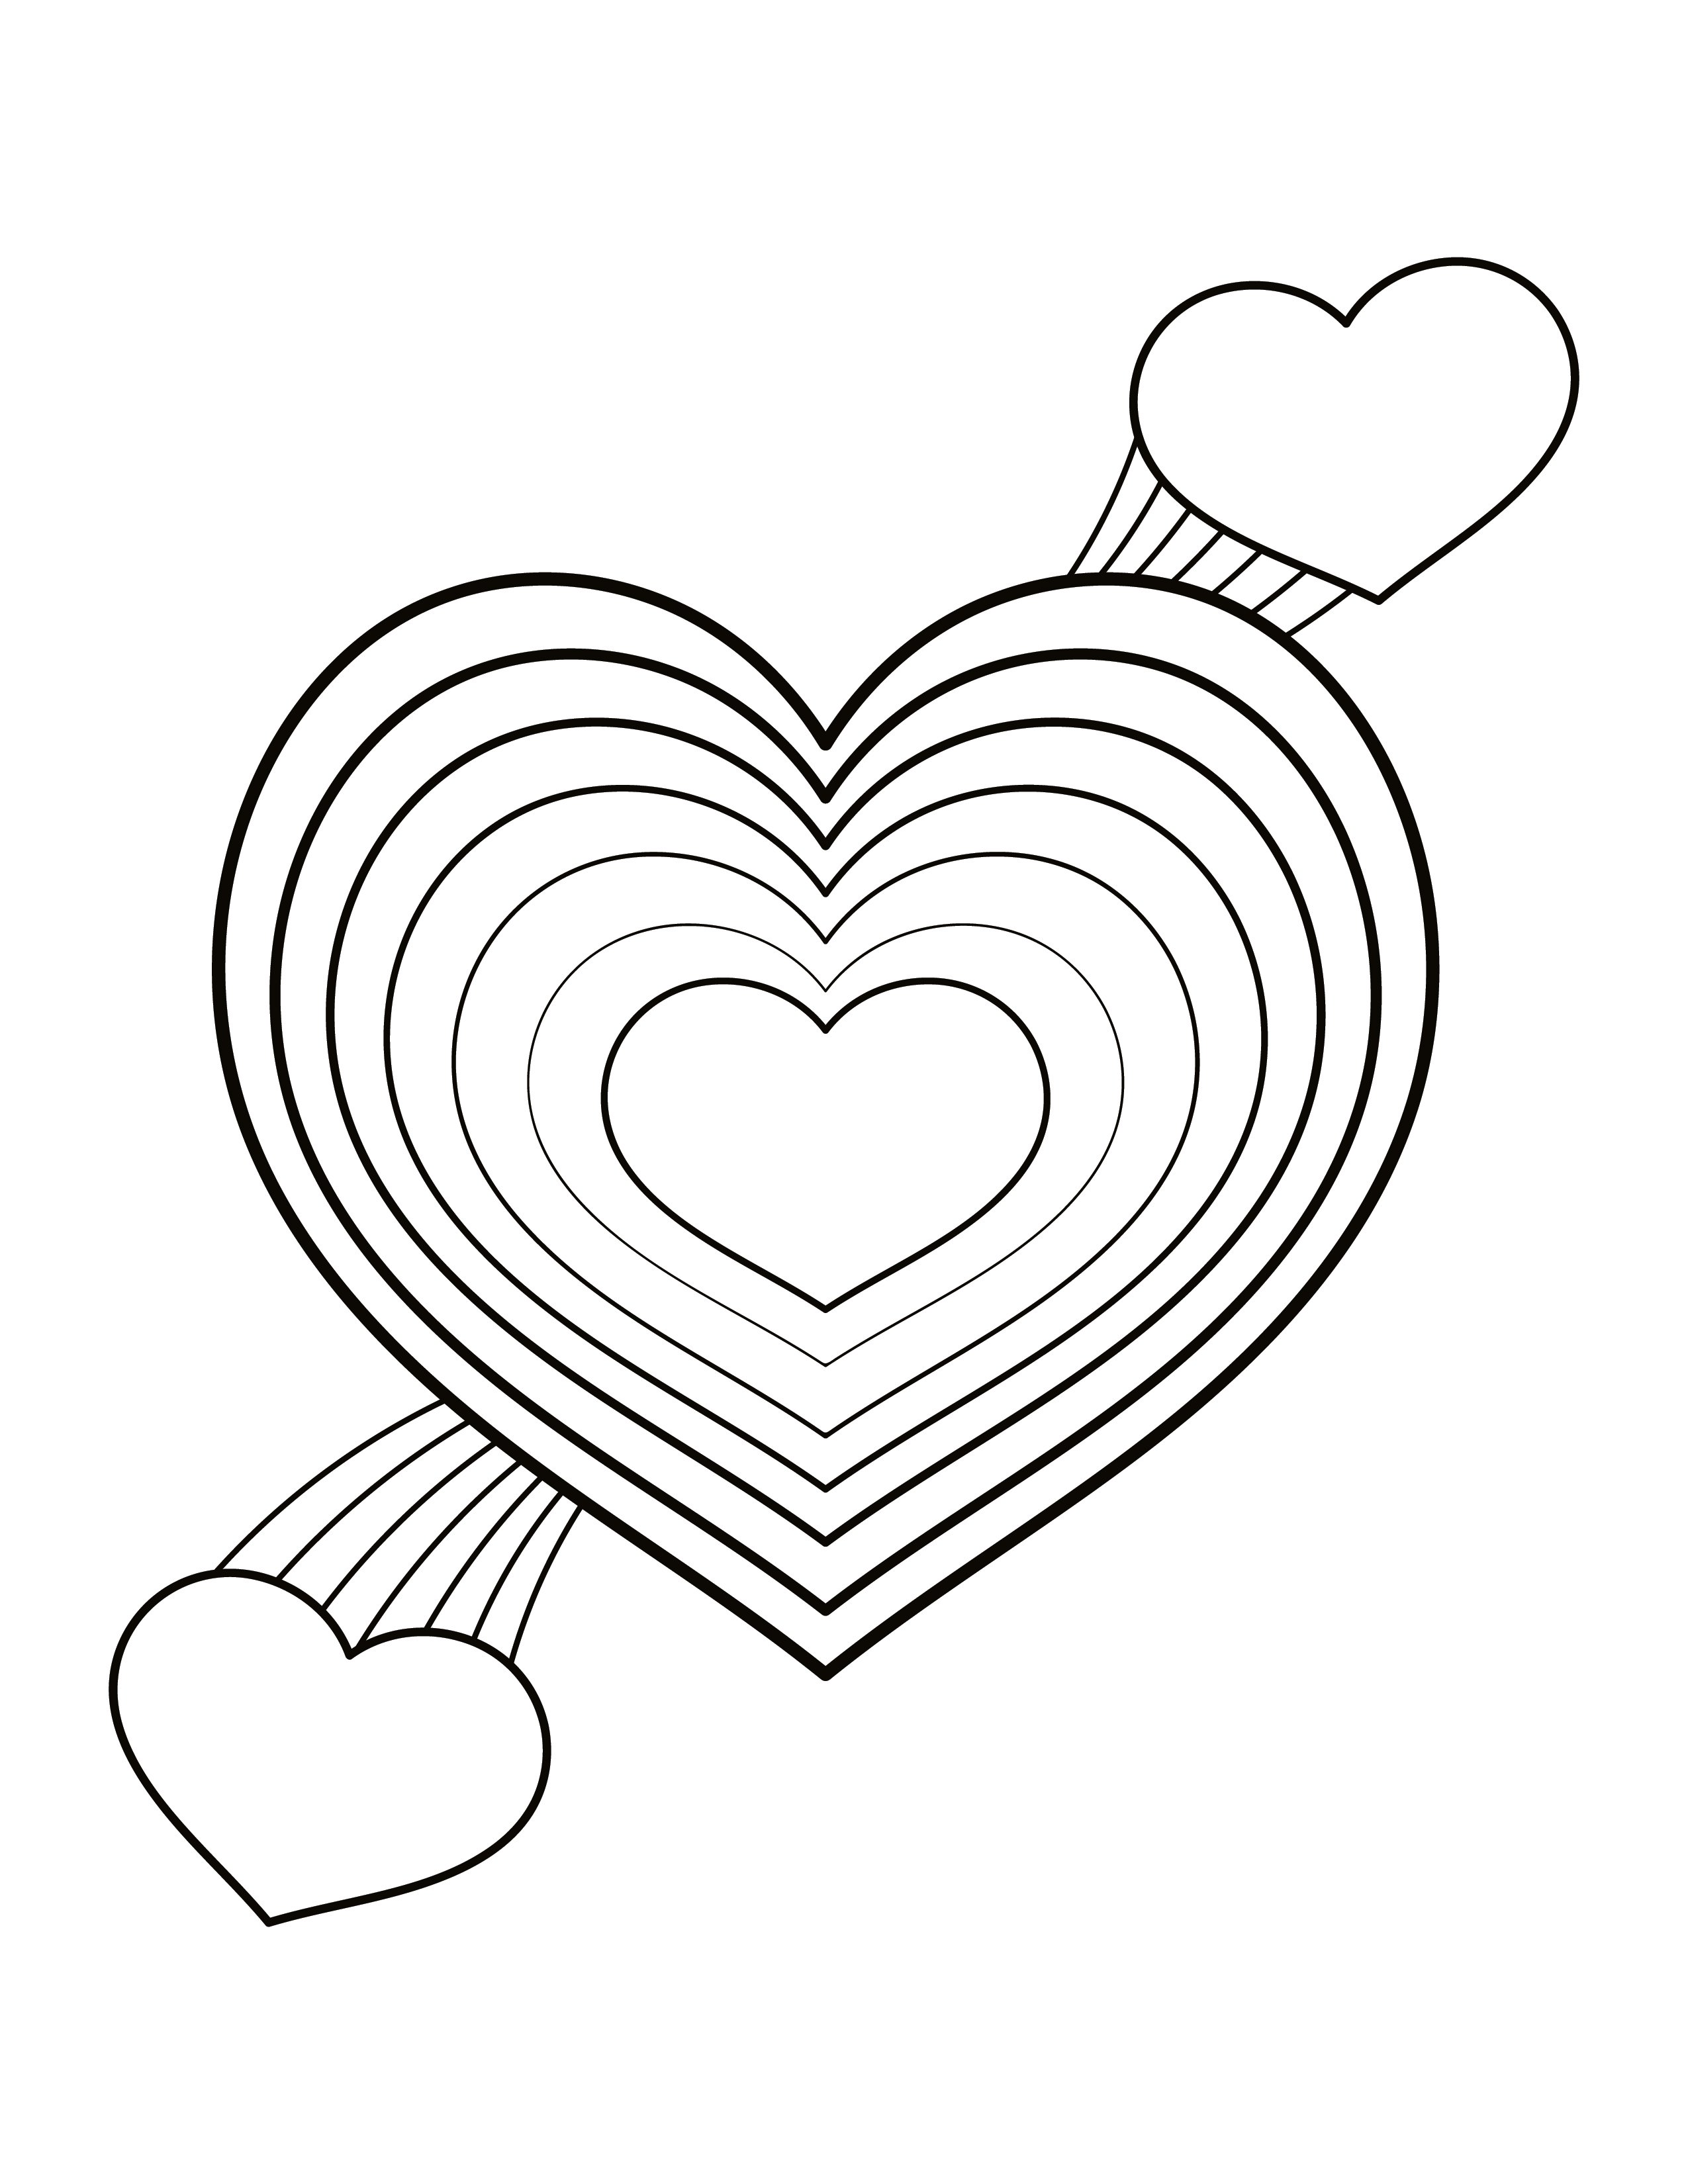 Rainbow Heart Coloring Pages Printable Coloring Pages